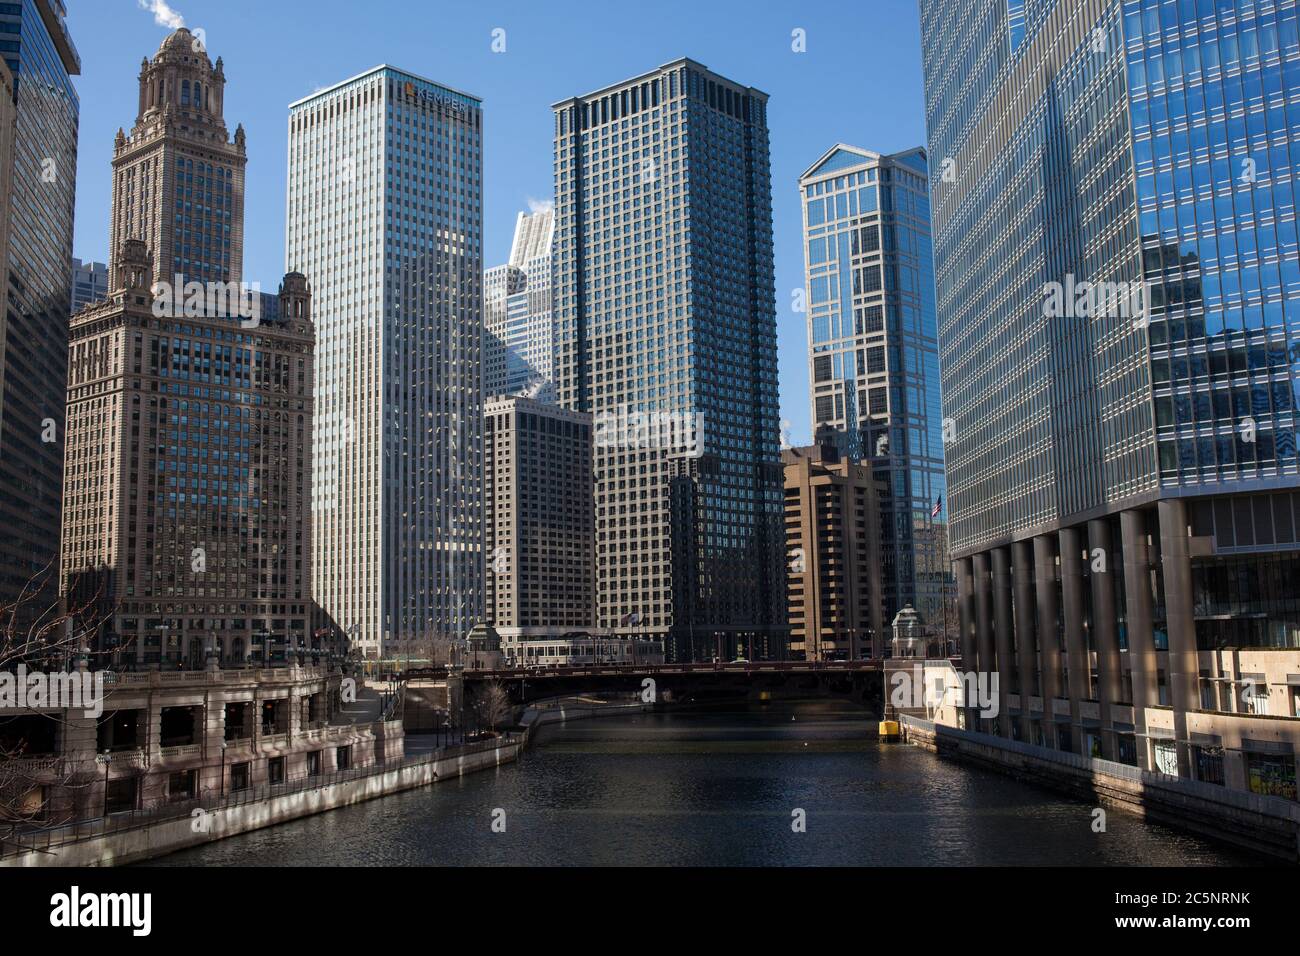 A view of the Chicago rover and surrounding skyline during winter sunshine. Stock Photo